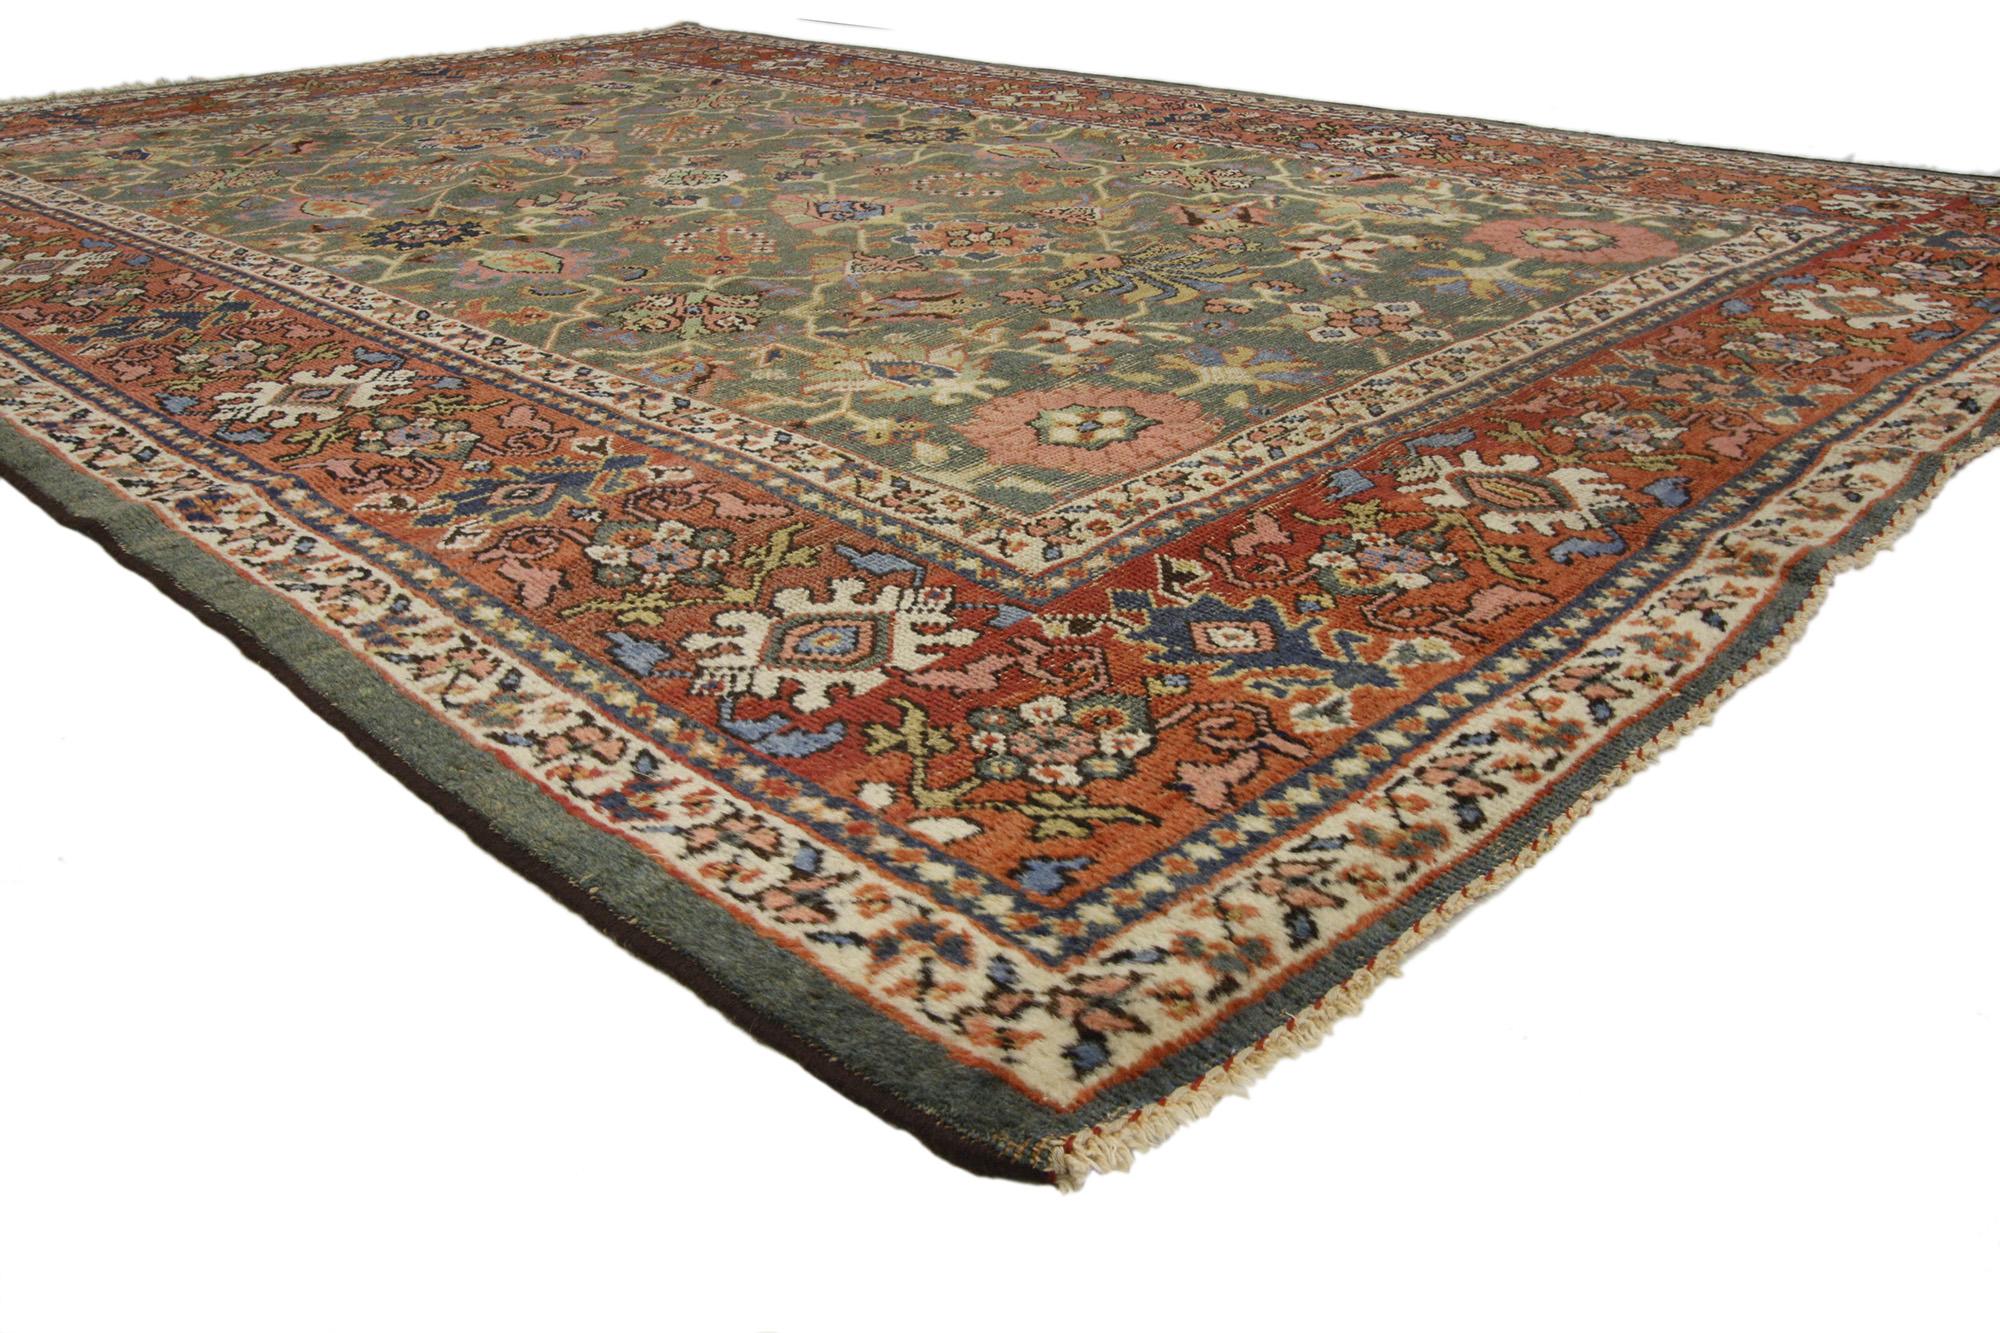 73173 distressed antique Persian Sultanabad rug with Rustic Arts and Crafts style 06'10 x 10'10. Displaying a timeless design and earthy colors combined with cozy simplicity, this hand-knotted wool distressed antique Persian Sultanabad rug